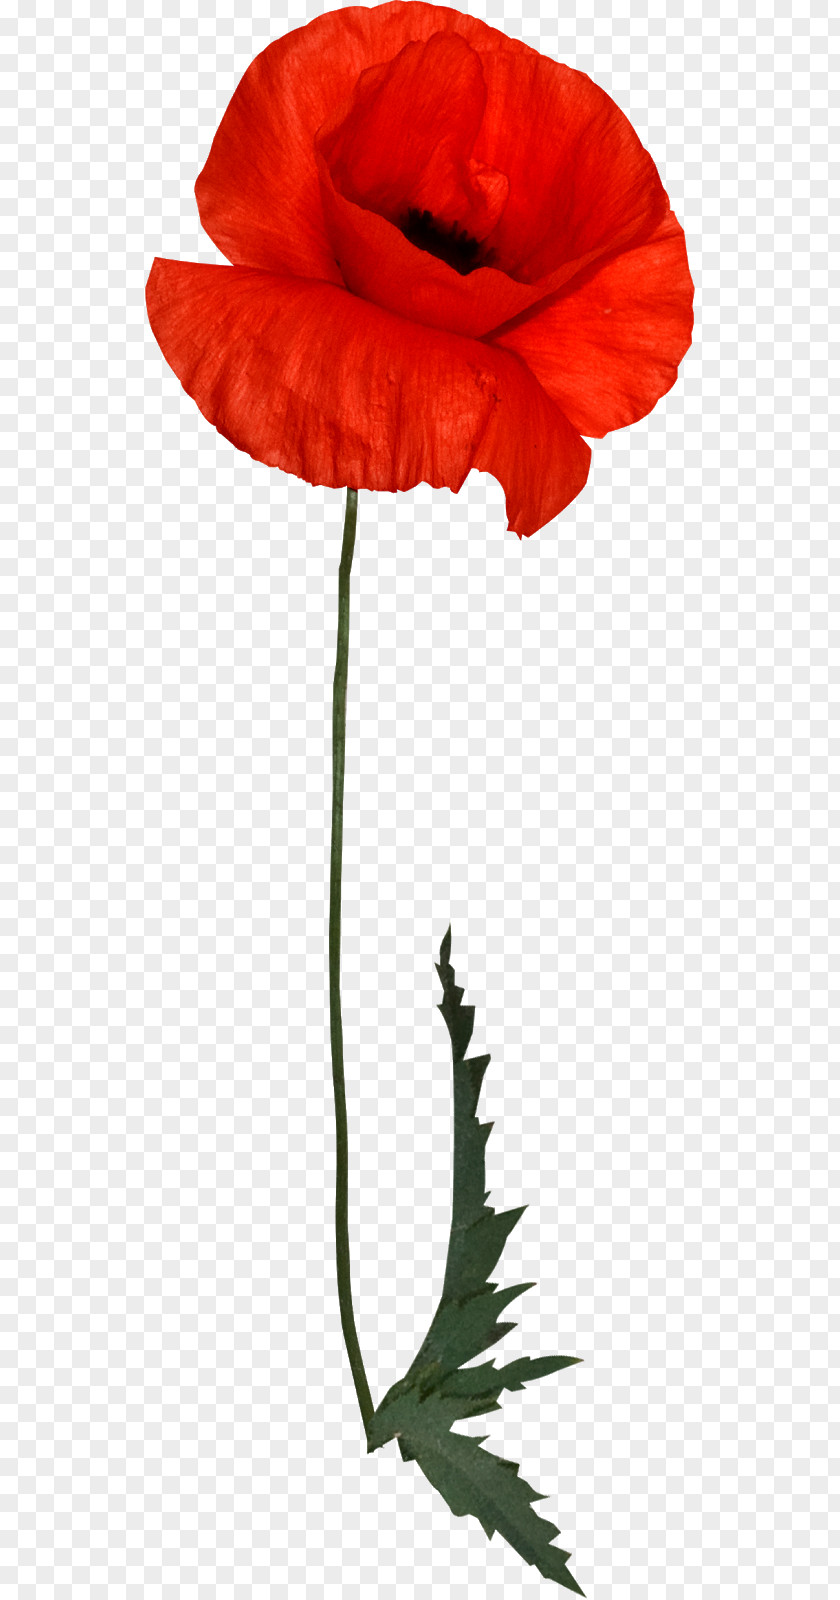 Poppy Red Common Image Clip Art PNG